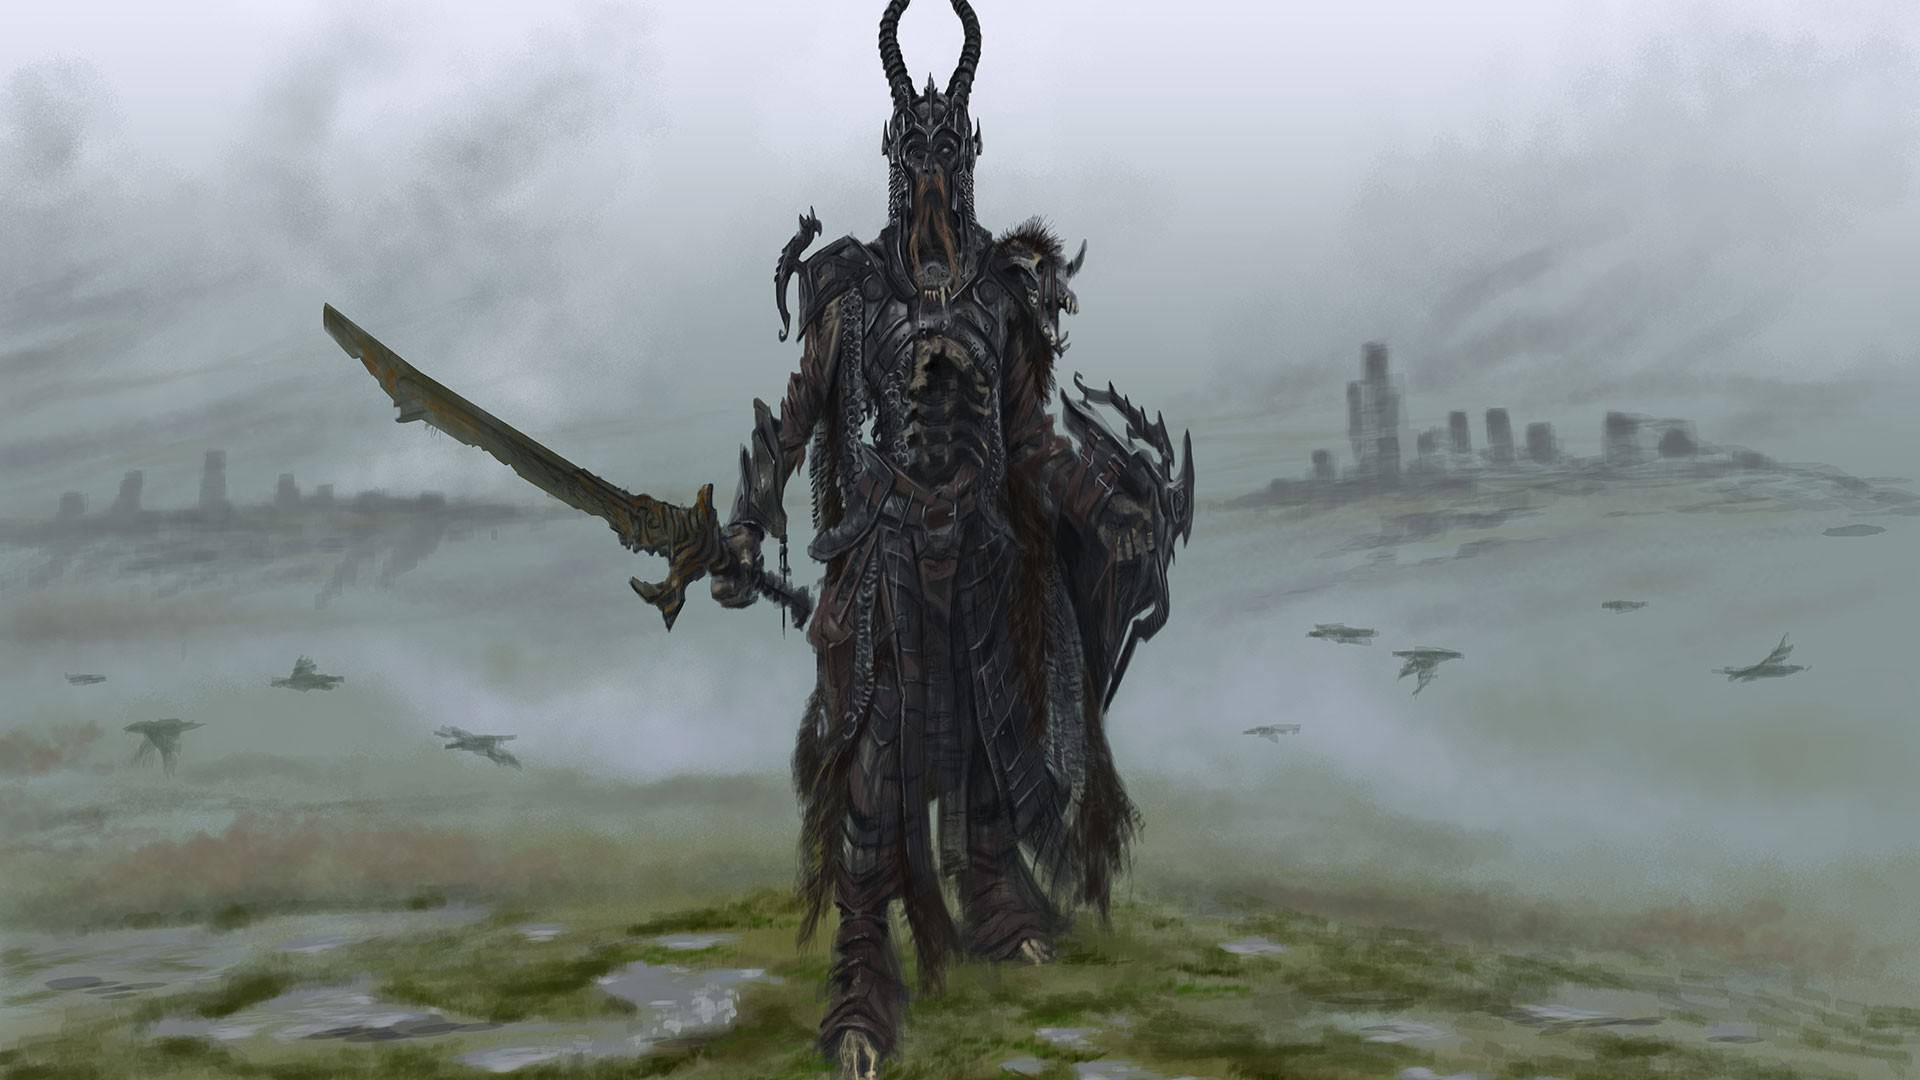 Standing over the bodies of his enemies, the Draugr Deathlord is a formidable force in The Lord Of The Rings. Wallpaper